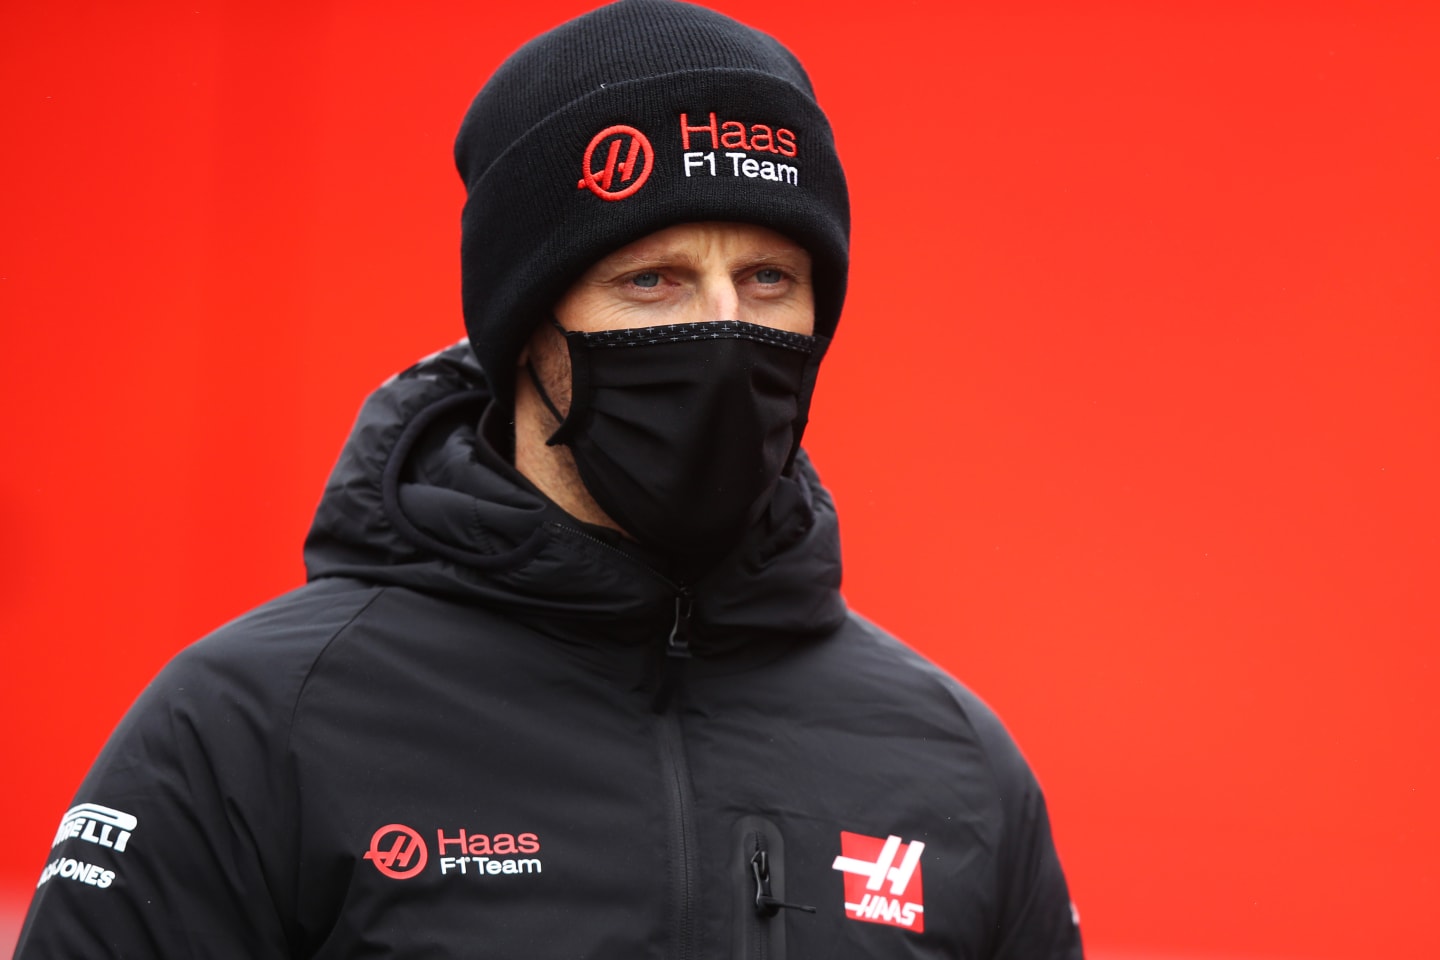 NUERBURG, GERMANY - OCTOBER 08: Romain Grosjean of France and Haas F1 walks in the Paddock during previews ahead of the F1 Eifel Grand Prix at Nuerburgring on October 08, 2020 in Nuerburg, Germany. (Photo by Mark Thompson/Getty Images)